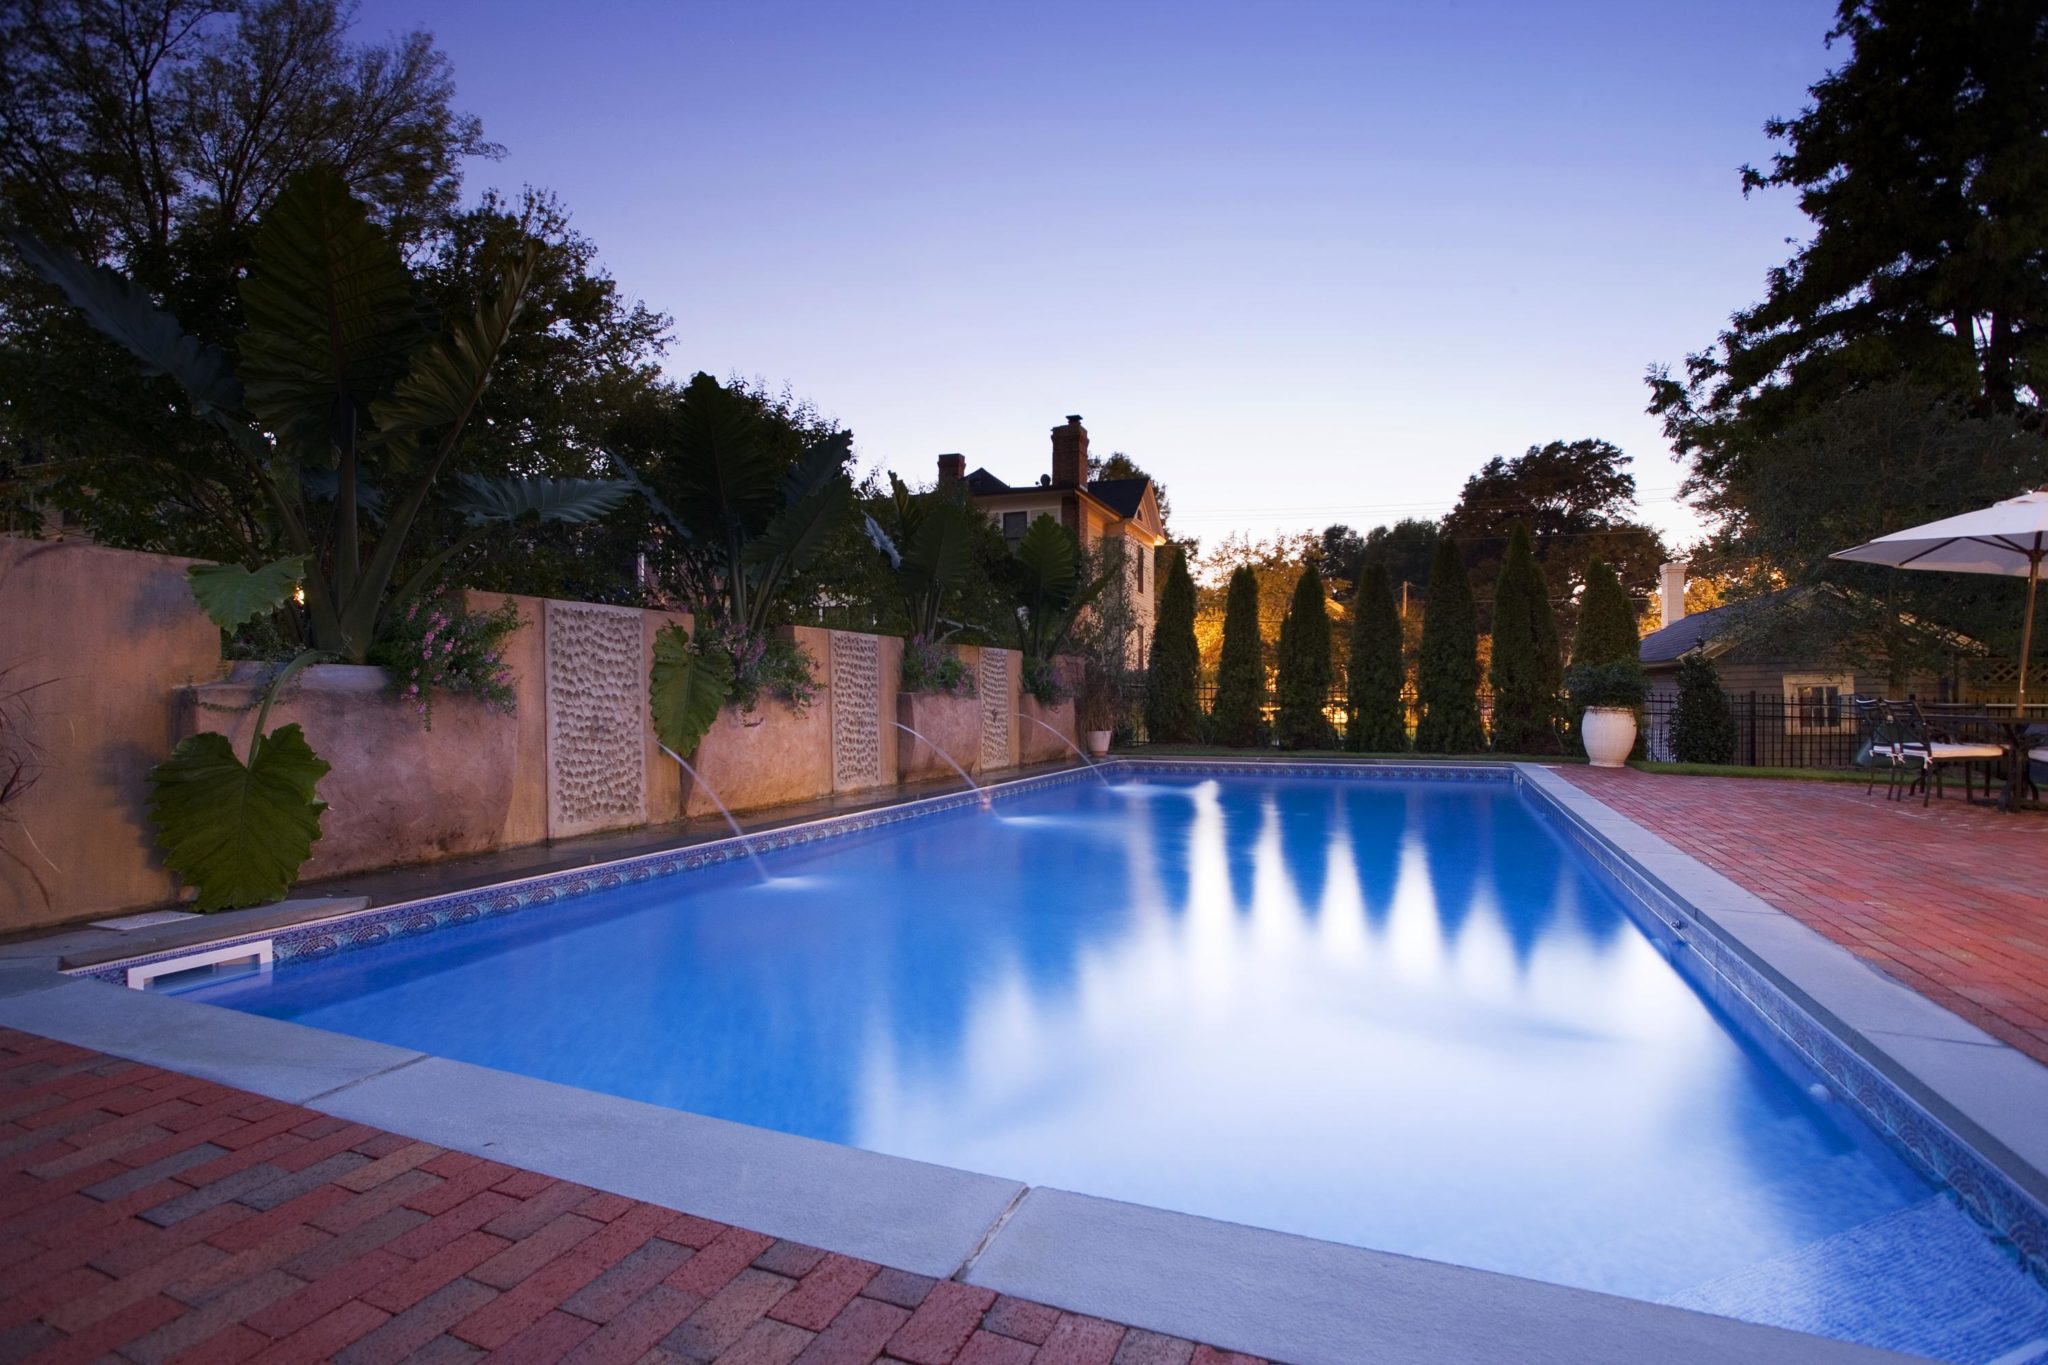 Rising sun pools and spas backyard pool with fountains